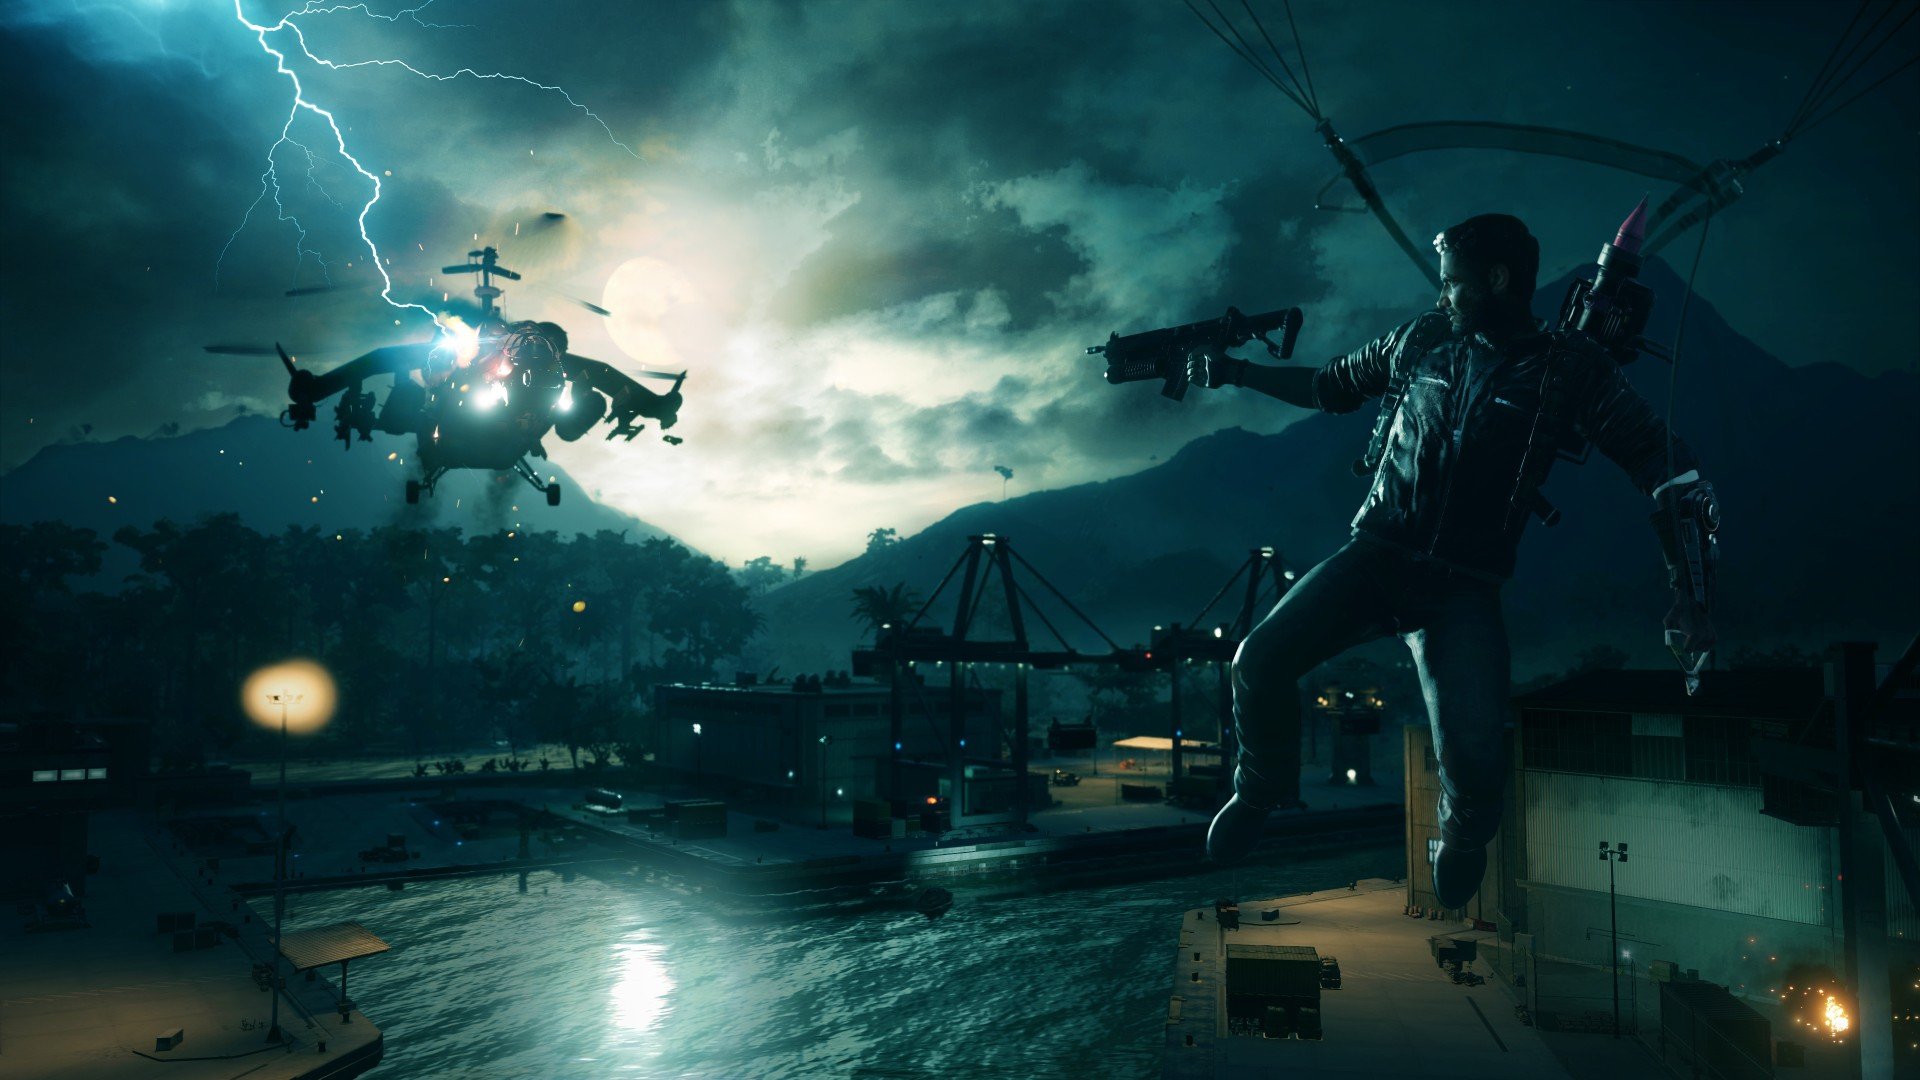 Play Just Cause 3 for Free Oct. 30 to Nov. 5 with Xbox Live Gold JC4_screenshot_Helicopter_Lightning_25_Sept_4PM_BST-1.jpg